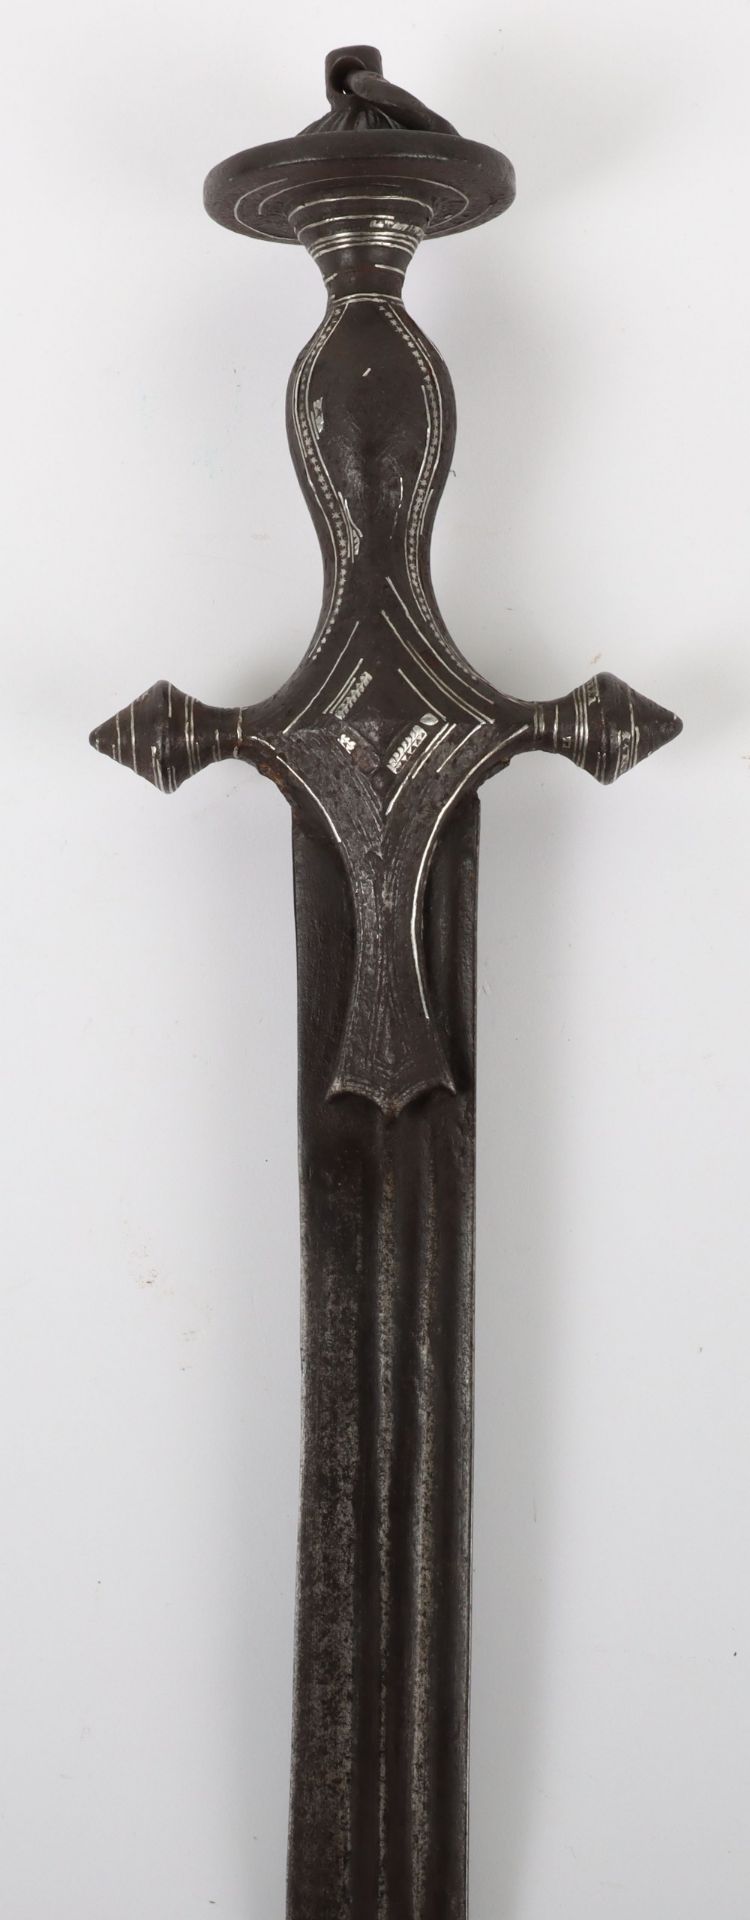 Early Indian Sword Tulwar, Probably 16th/17th Century